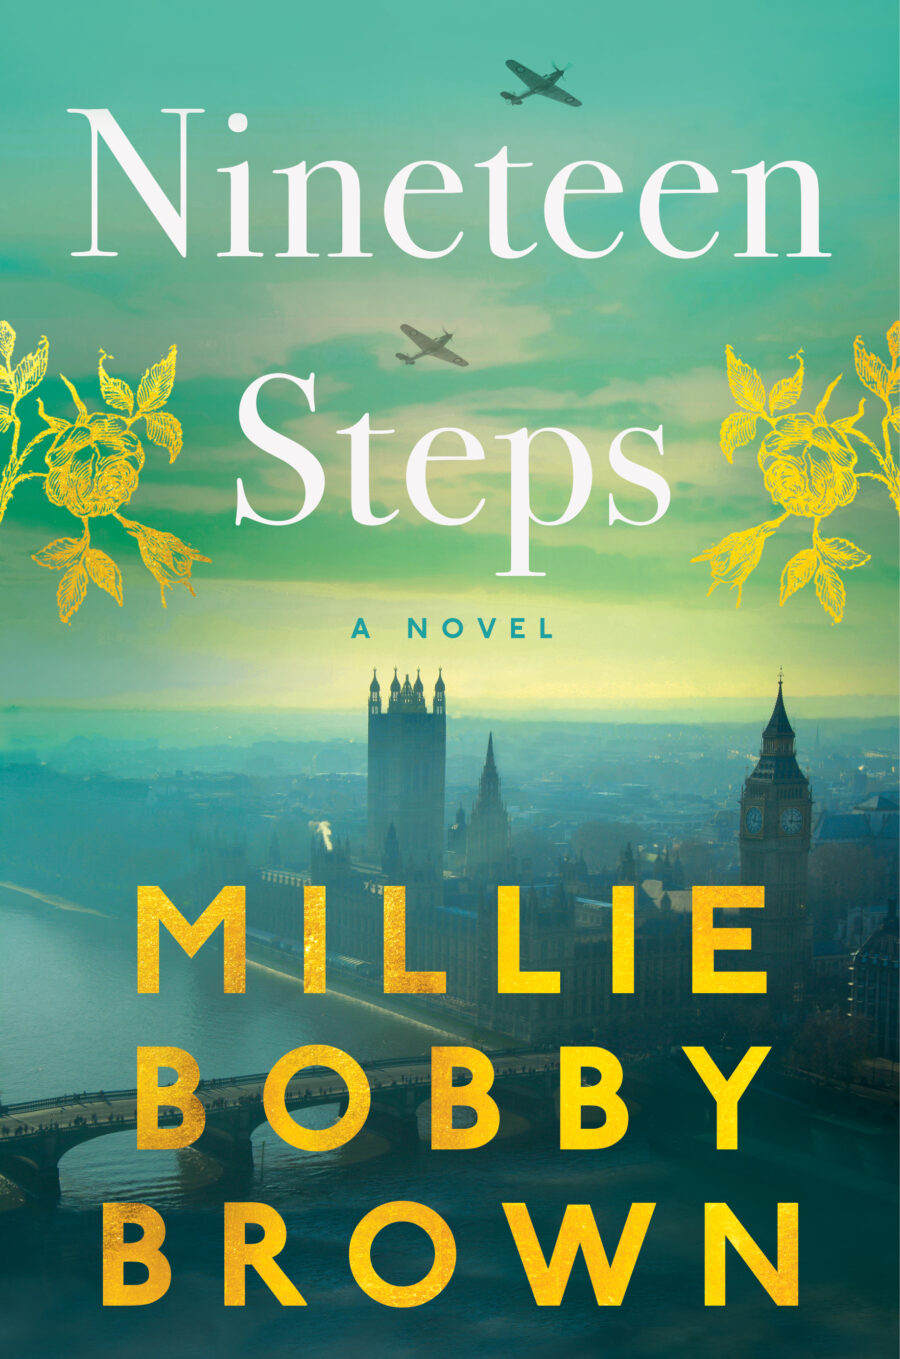 book review nineteen steps